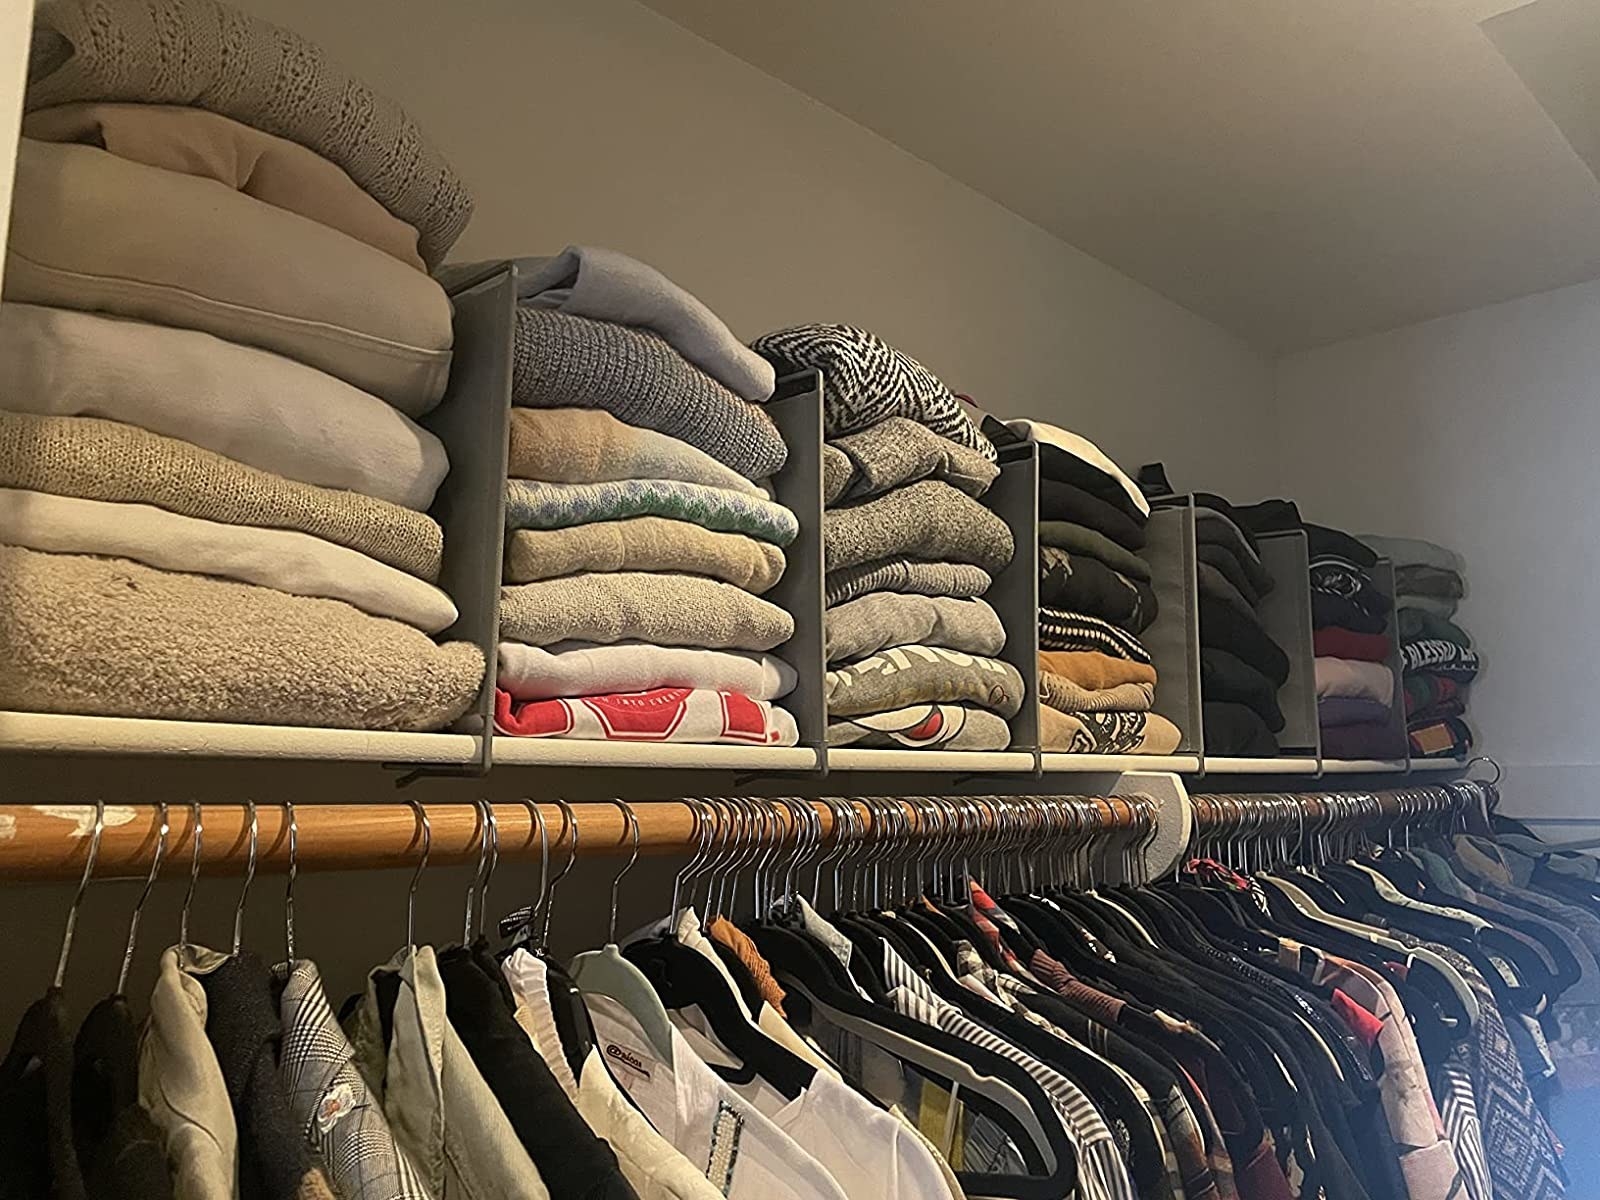 A customer review photo of their closet neatly organized using the dividers